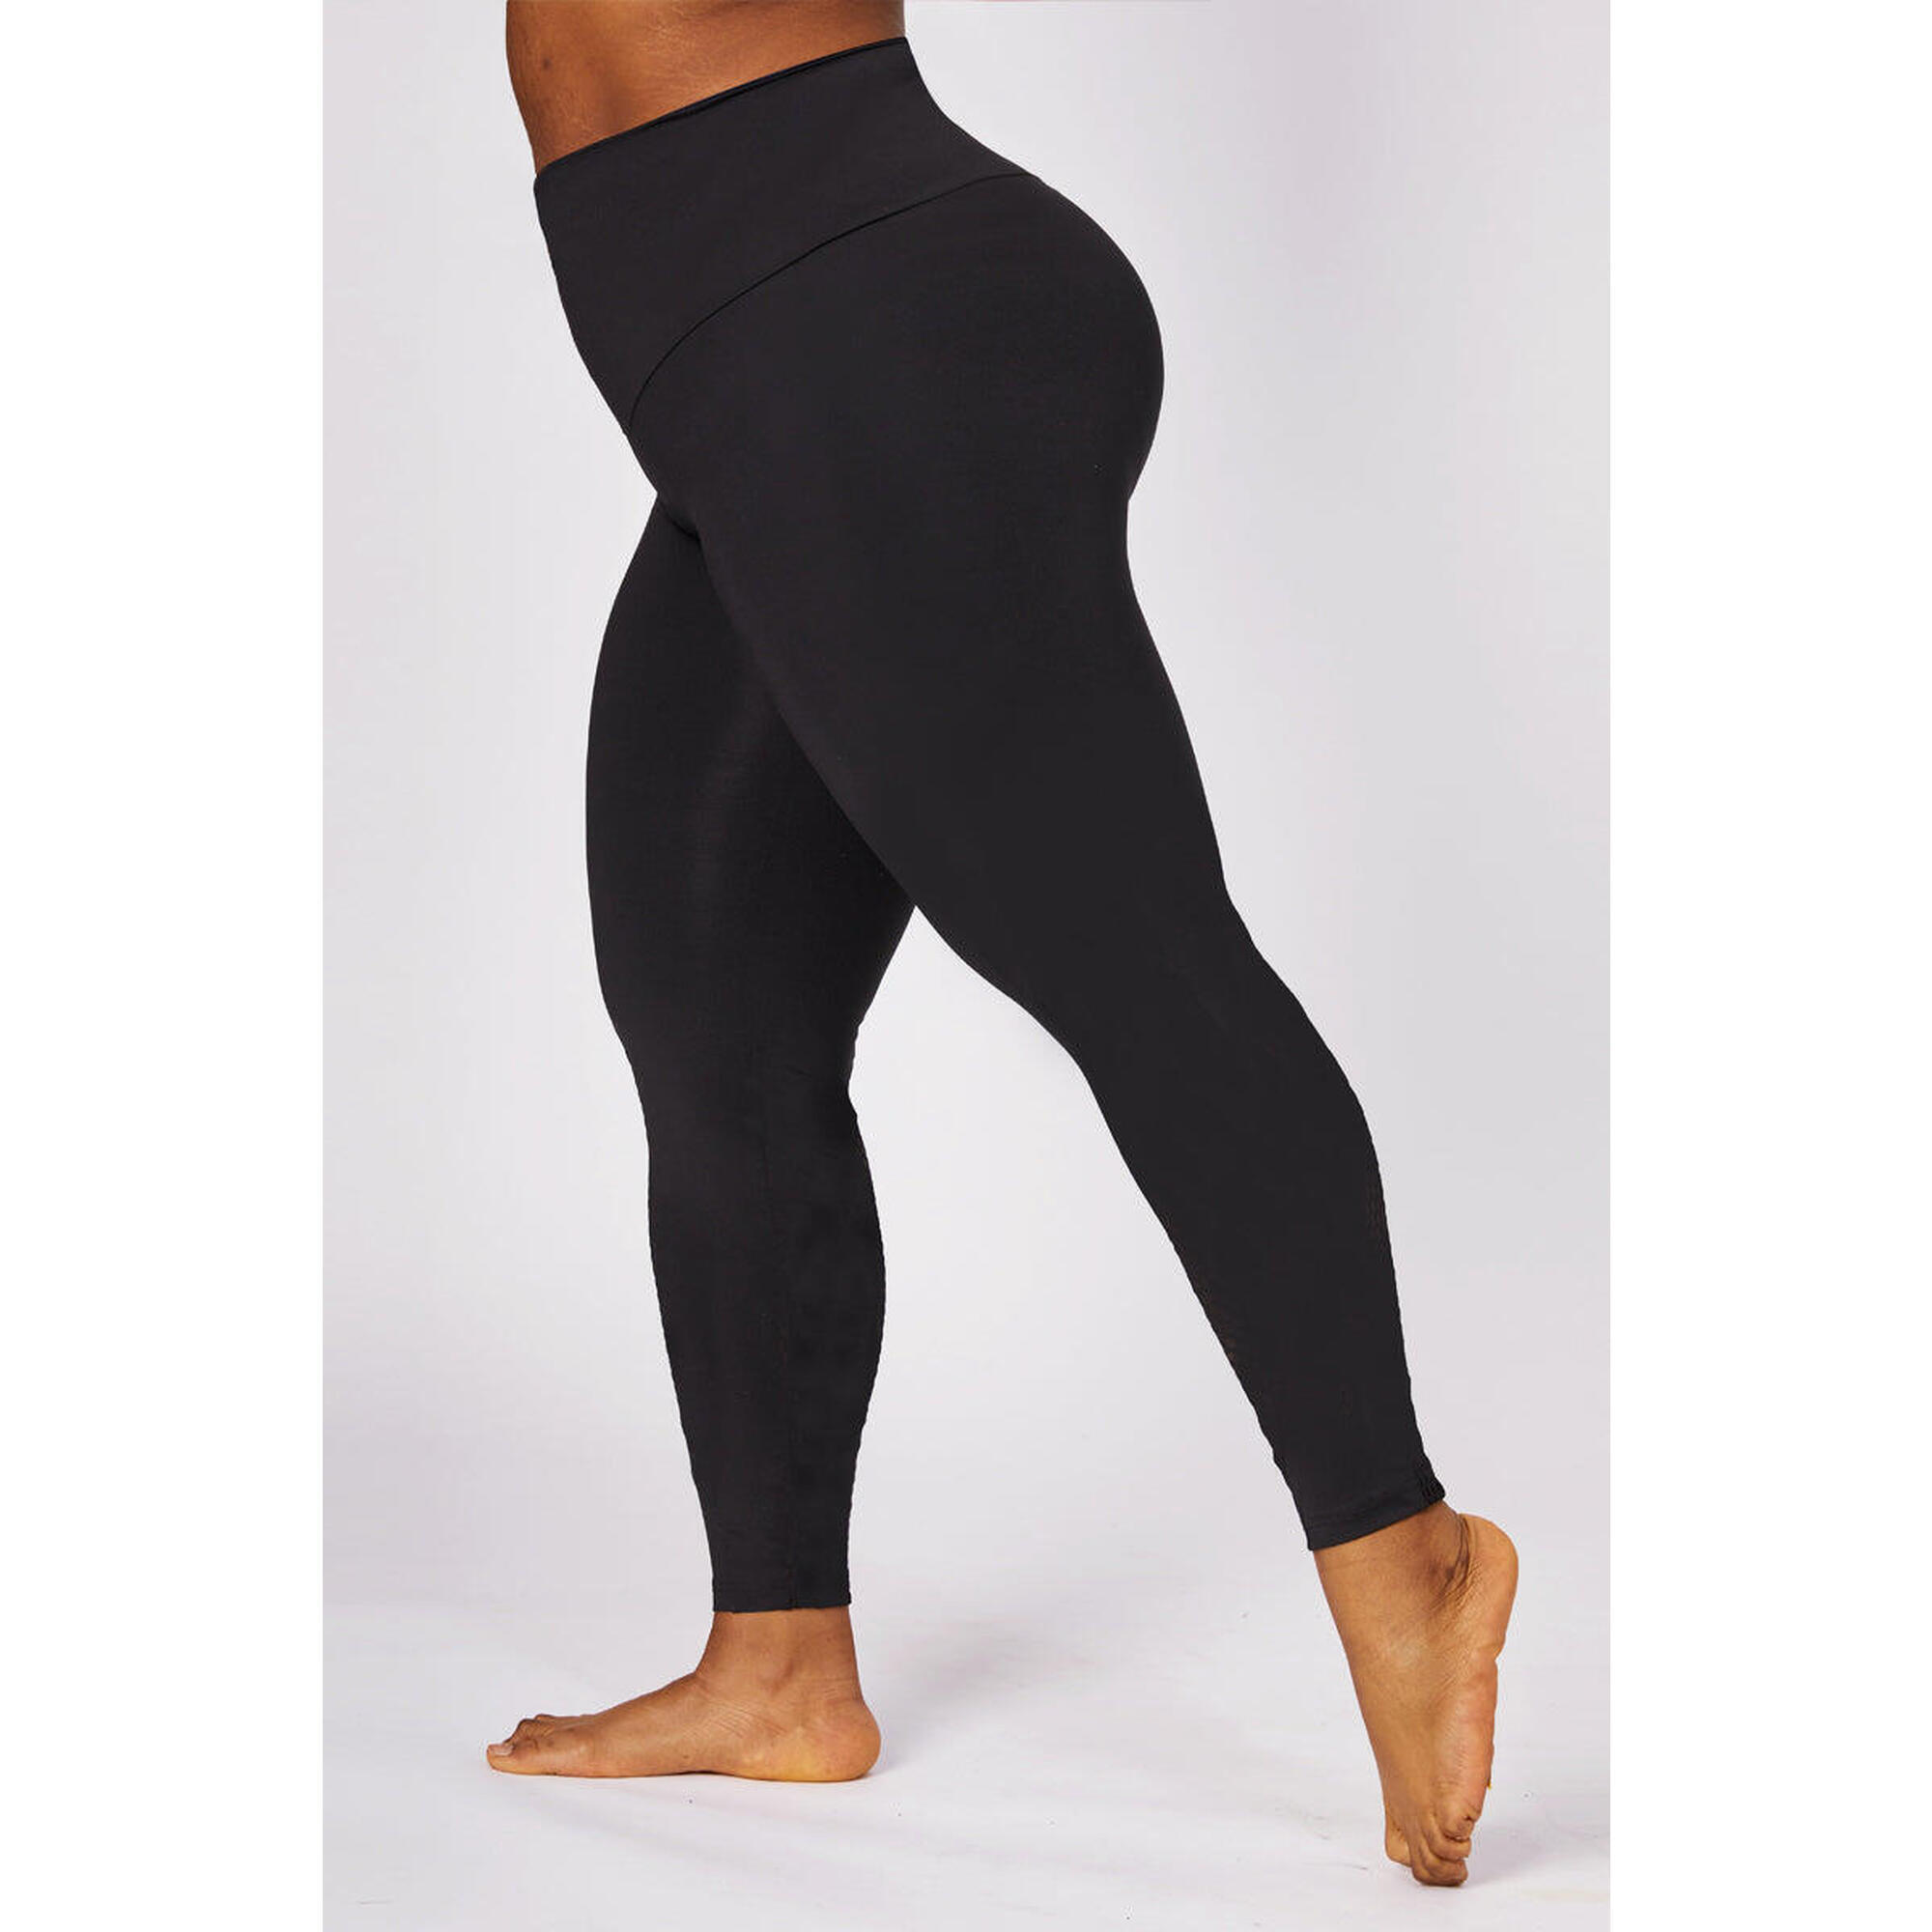 TLC SPORT Extra Strong Compression Curve Leggings with Waisted Tummy Control Black